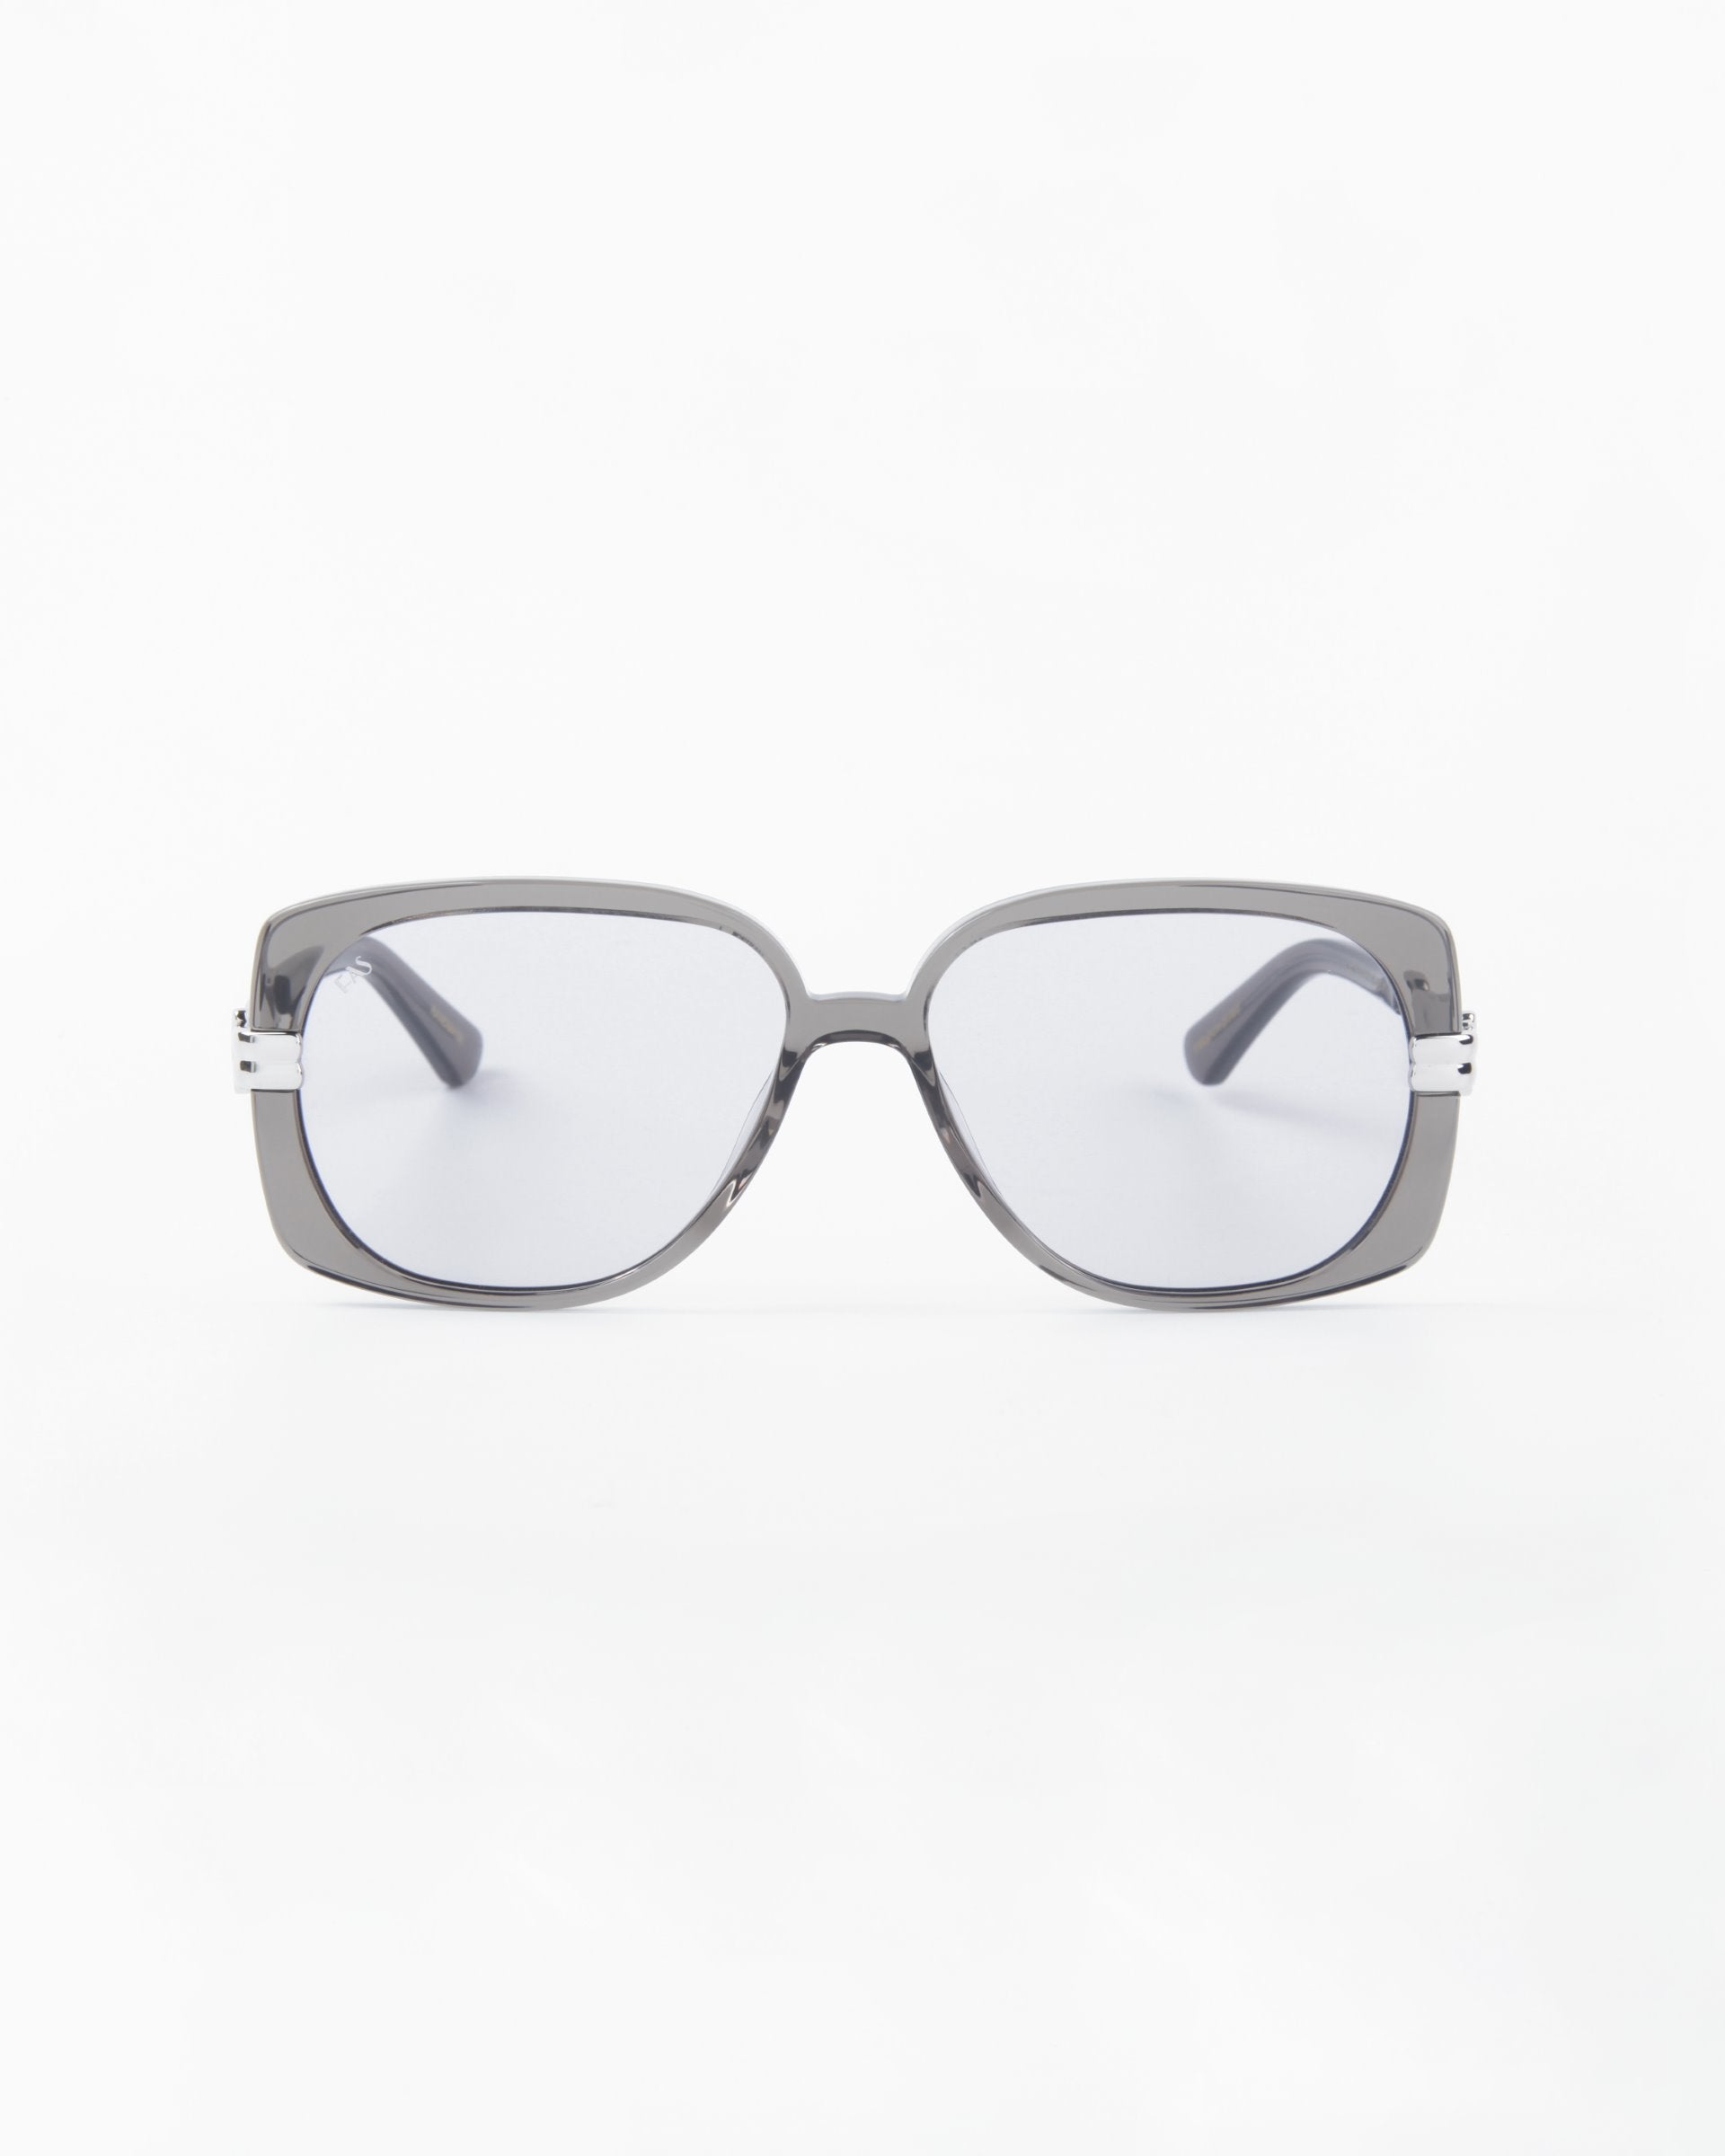 A pair of modern, gray-framed Icon sunglasses by For Art's Sake® with rectangular, shatter-resistant nylon lenses on a plain white background. The Icon sunglasses by For Art's Sake® are handmade, boasting a sleek and minimalist design with slightly curved arms and a polished finish.